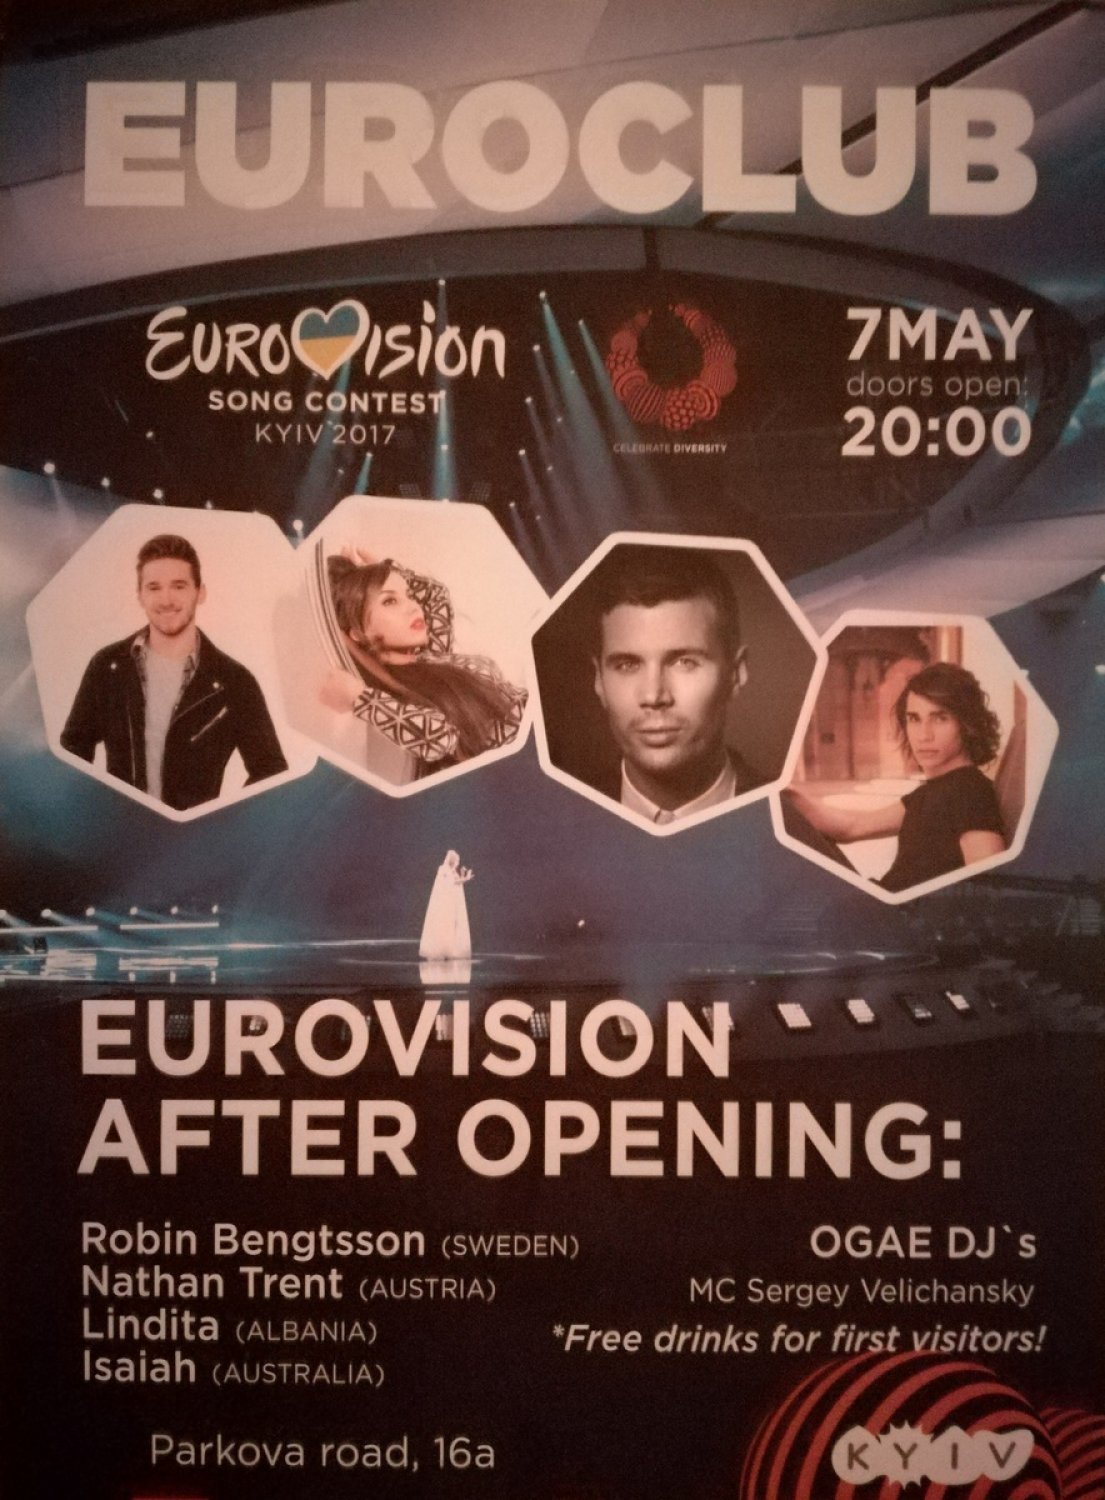 Eurovision 2017 : Europarty Opening à l'Euroclub